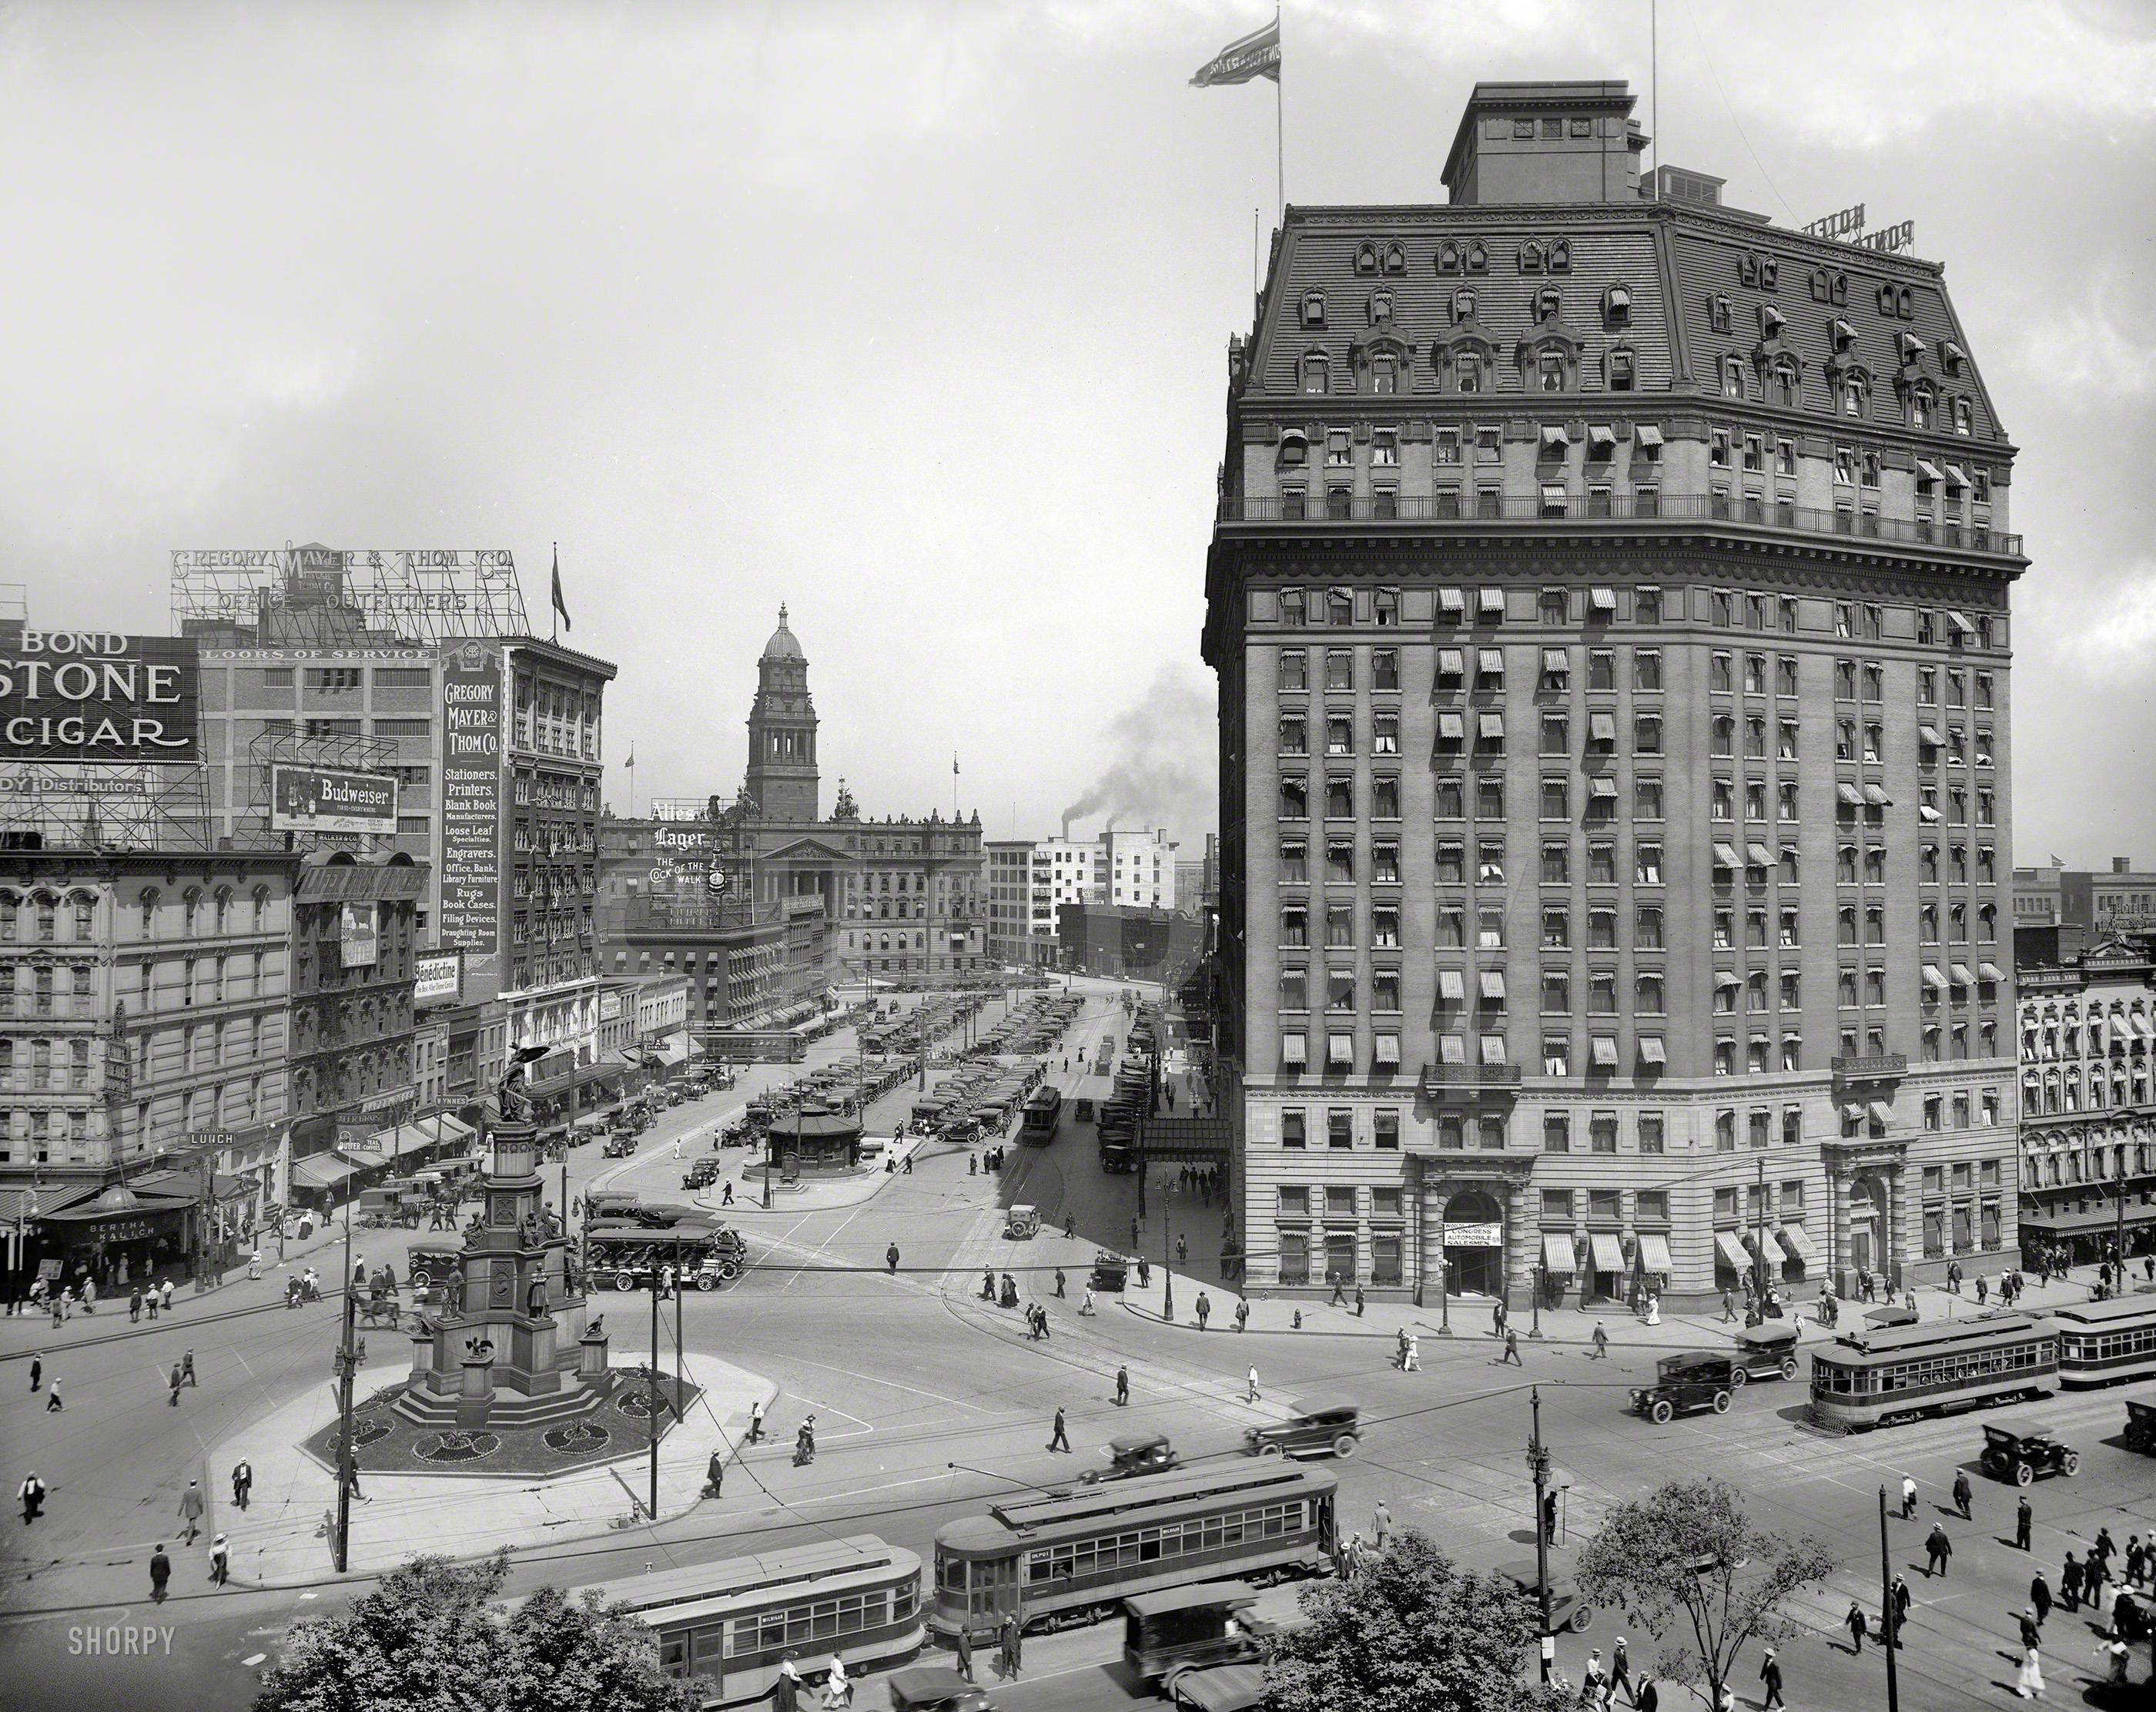 Detroit, Michigan, circa 1916. "Hotel Pontchartrain and Cadillac Square from City Hall." Detroit Publishing Co. glass negative. View full size. Earlier views of the hotel: Circa 1907, minus the upper floors, and 1910, minus most of the cars.